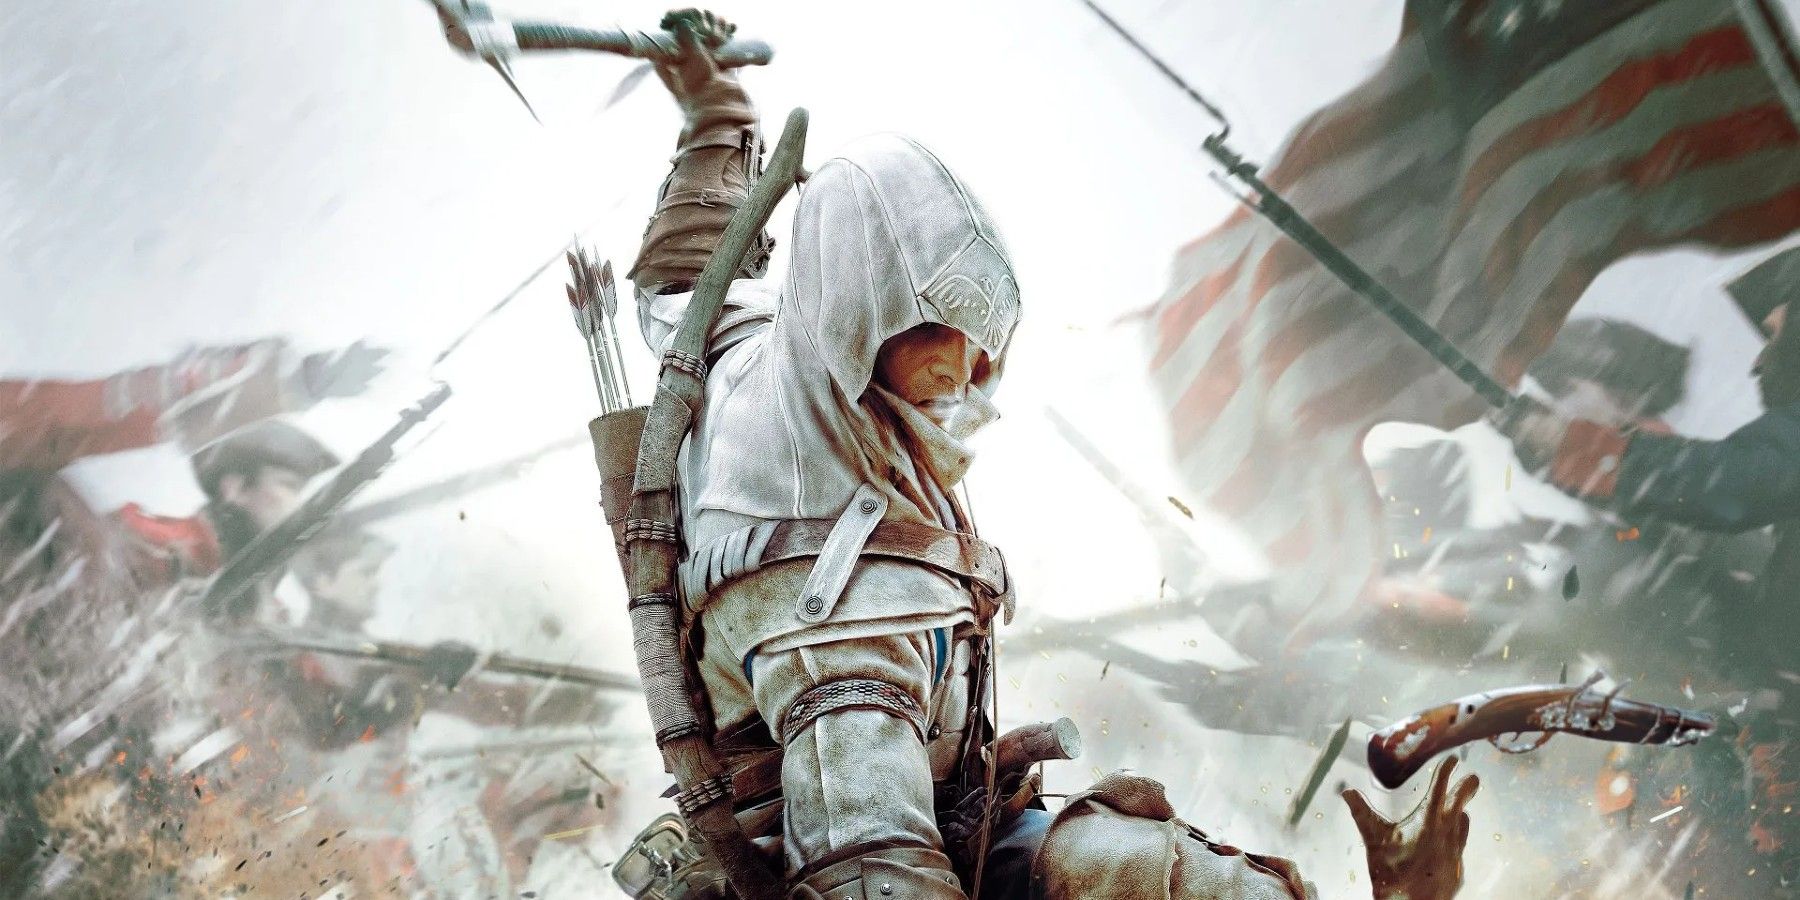 AC3] Connor Kenway  Assassins creed, Assassin's creed, Assassins creed 3